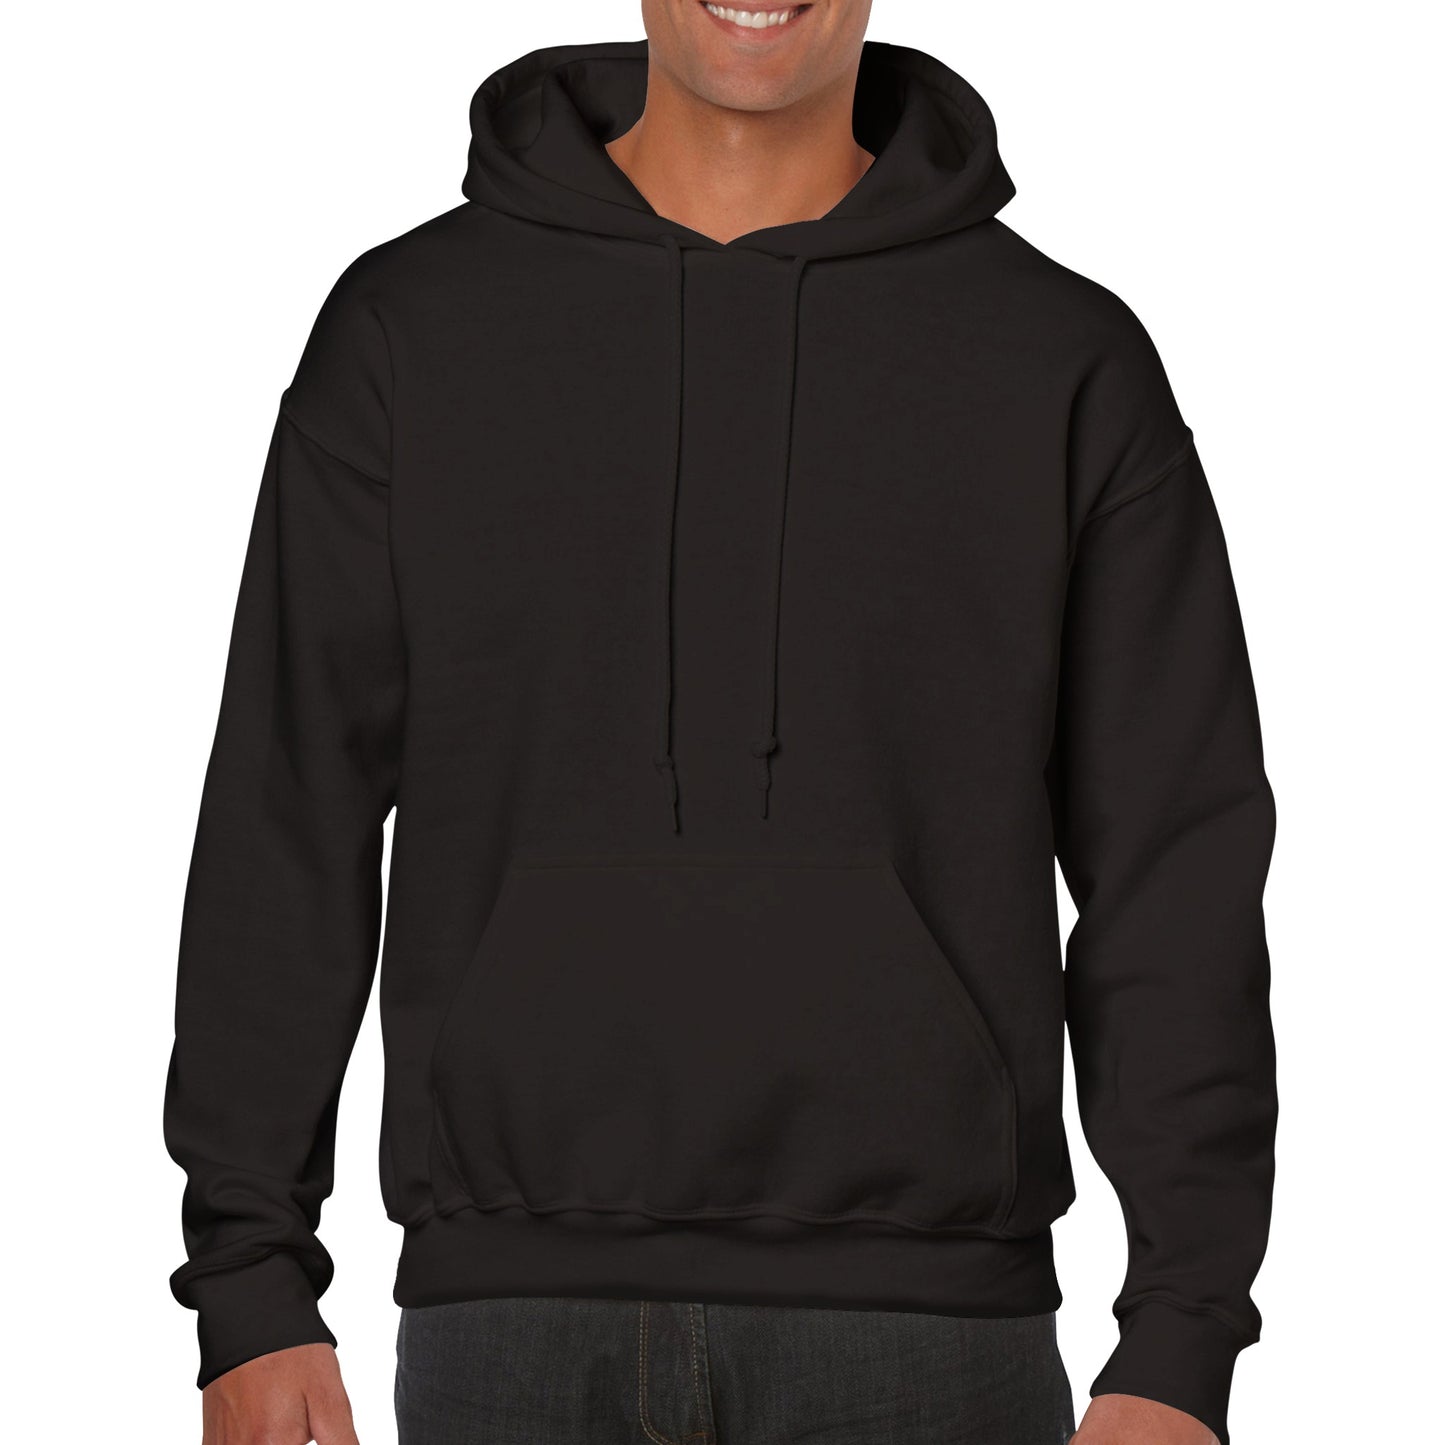 She's The Boss Classic Unisex Pullover Hoodie